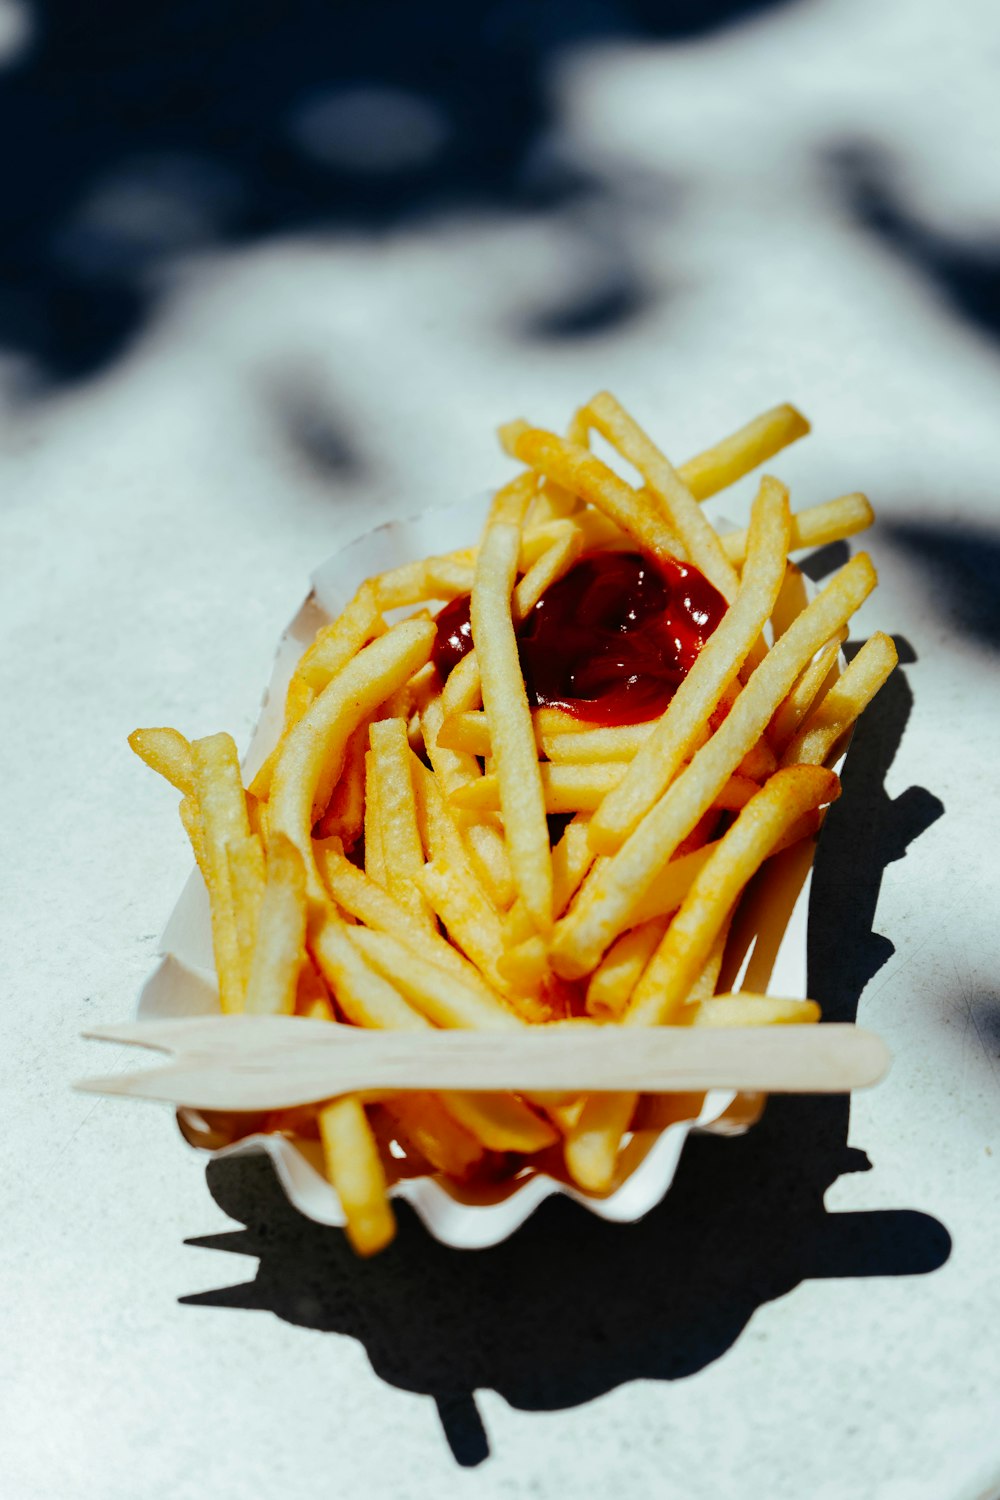 french fries with ketchup on white paper